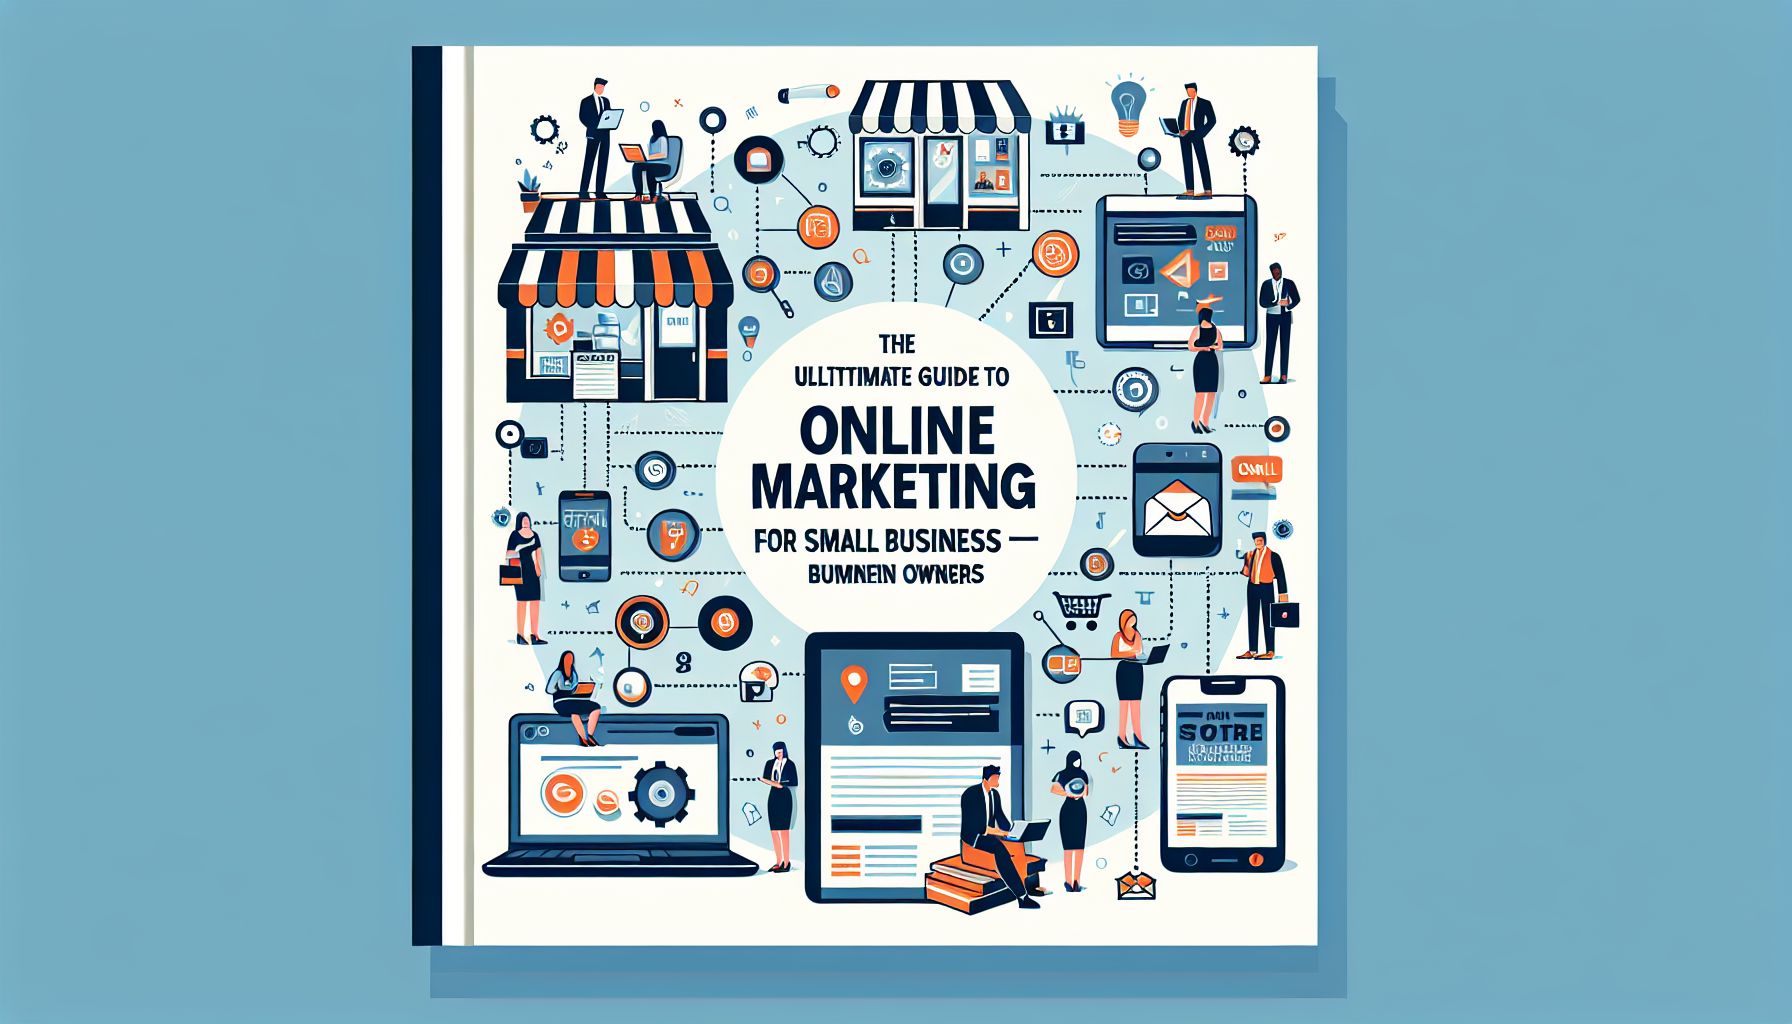 The Ultimate Guide to Online Marketing for Small Business Owners